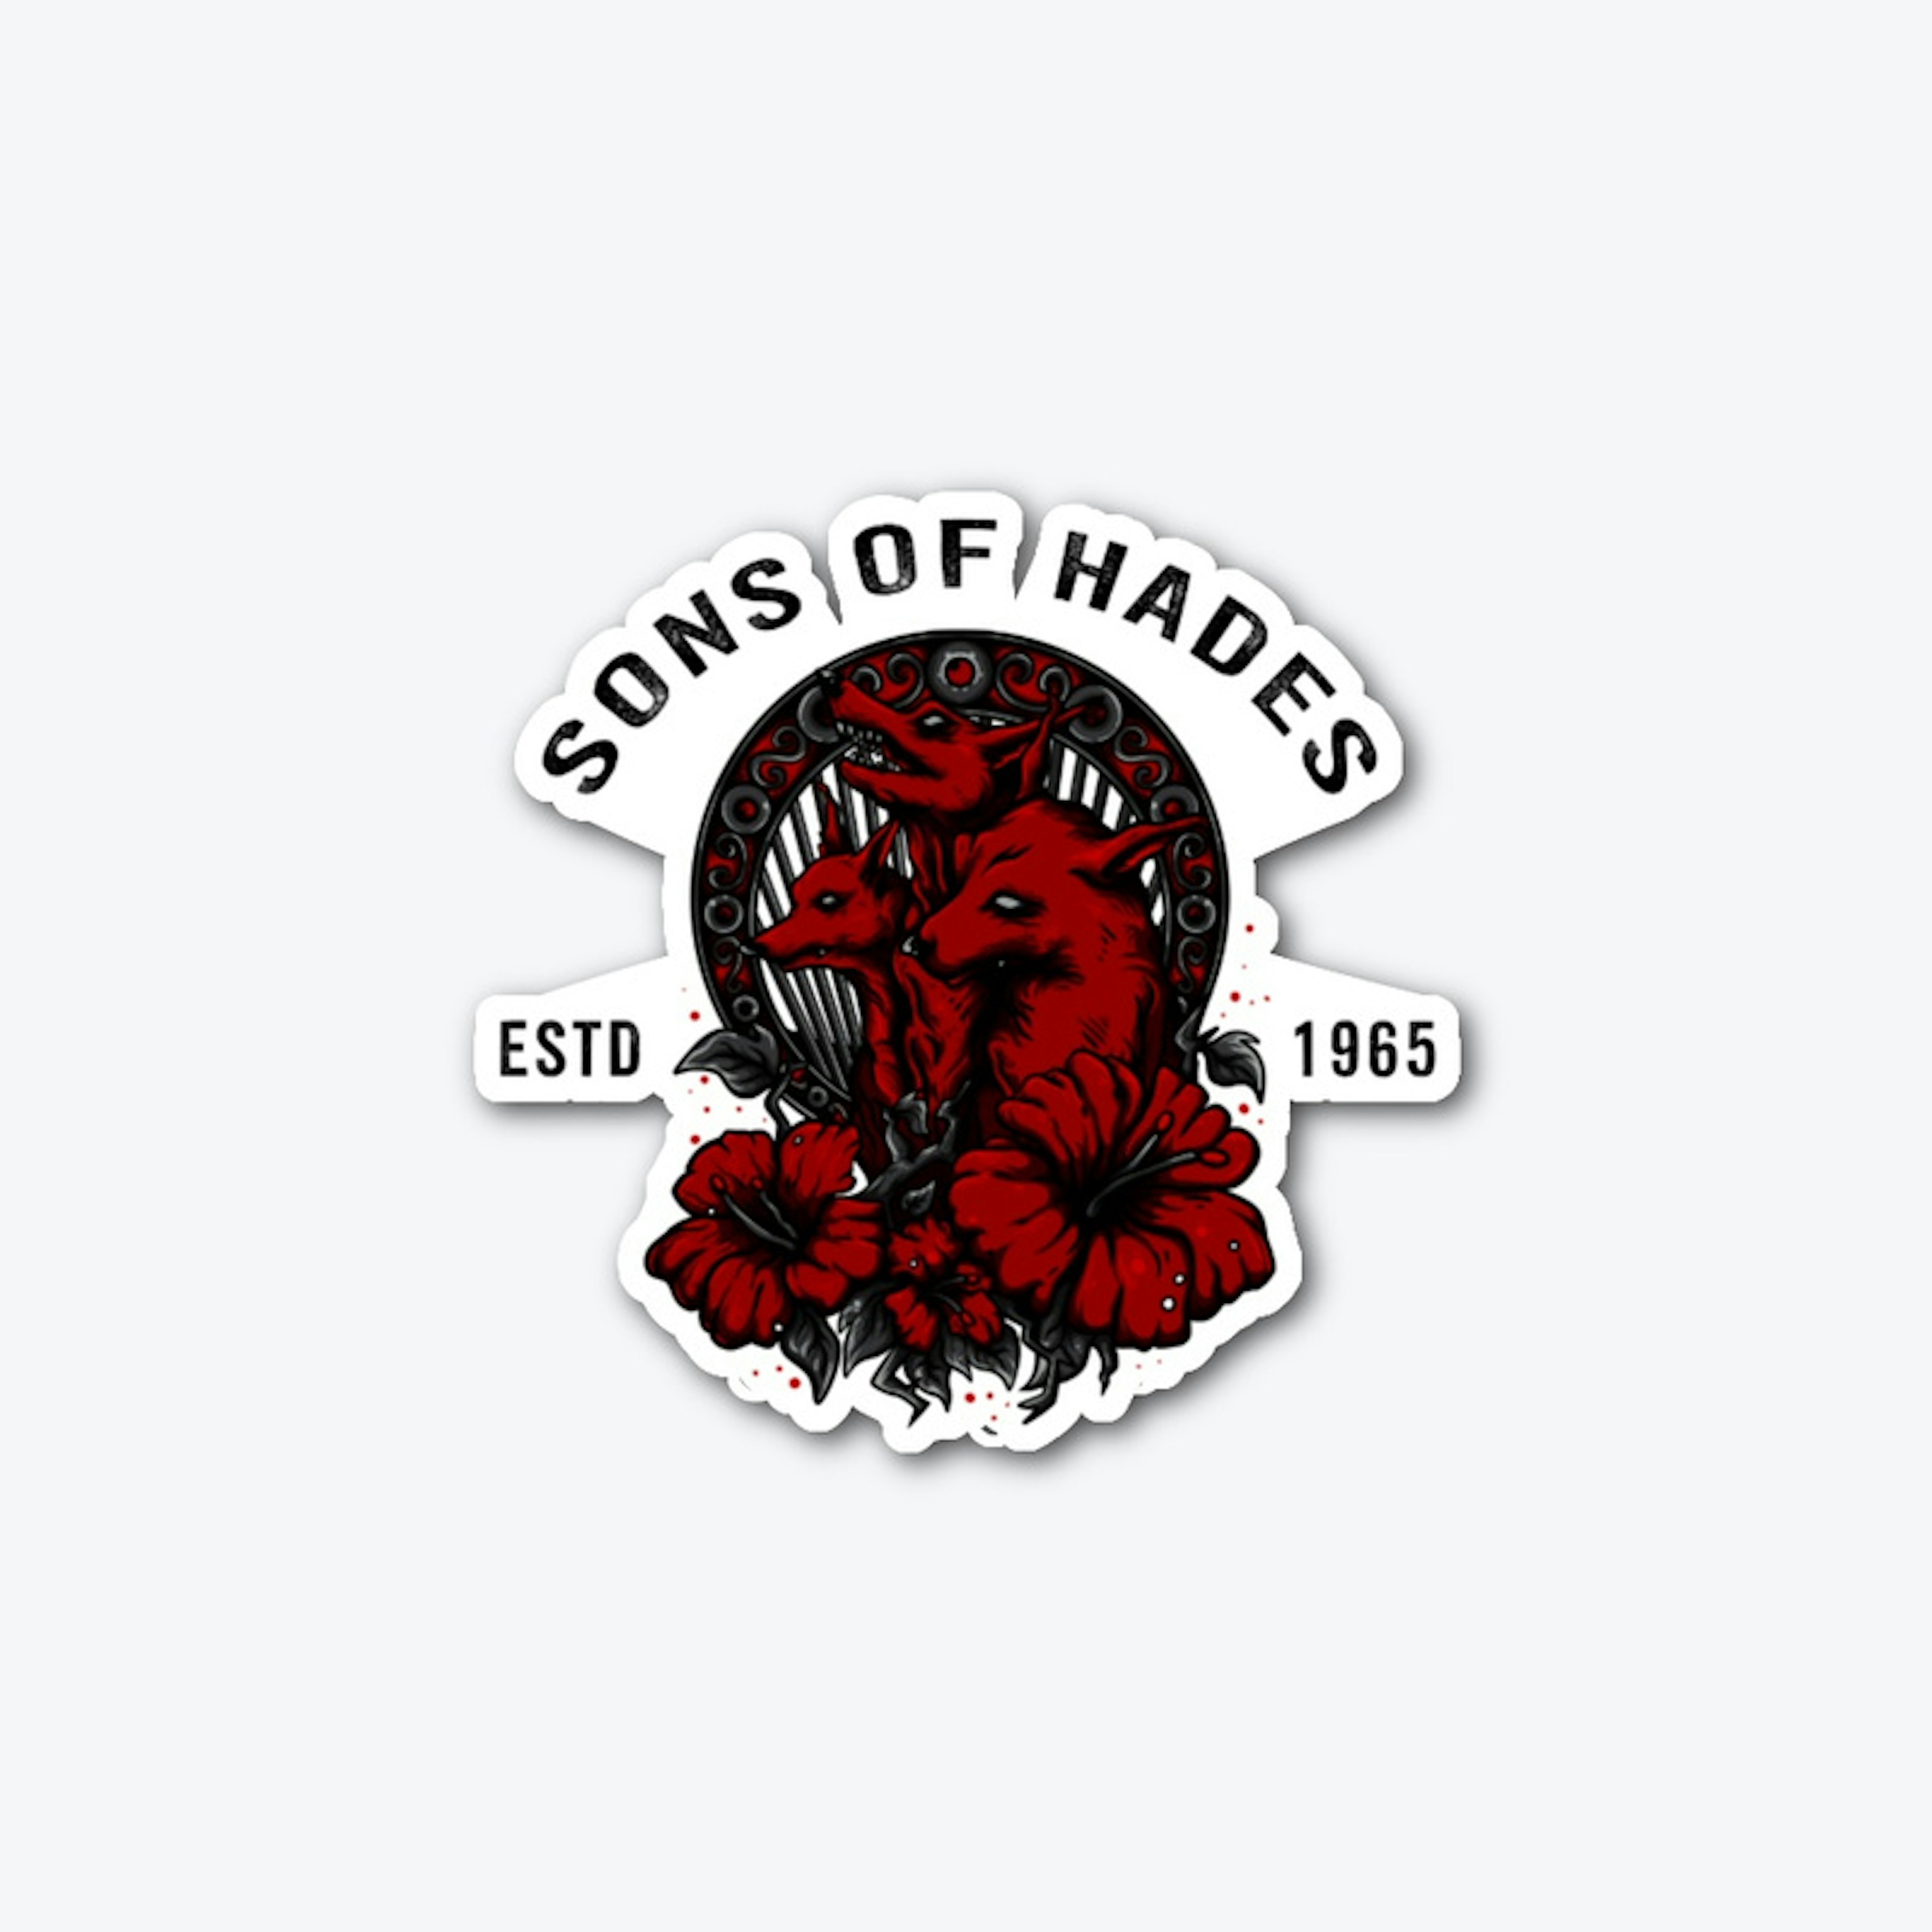 Sons of Hades